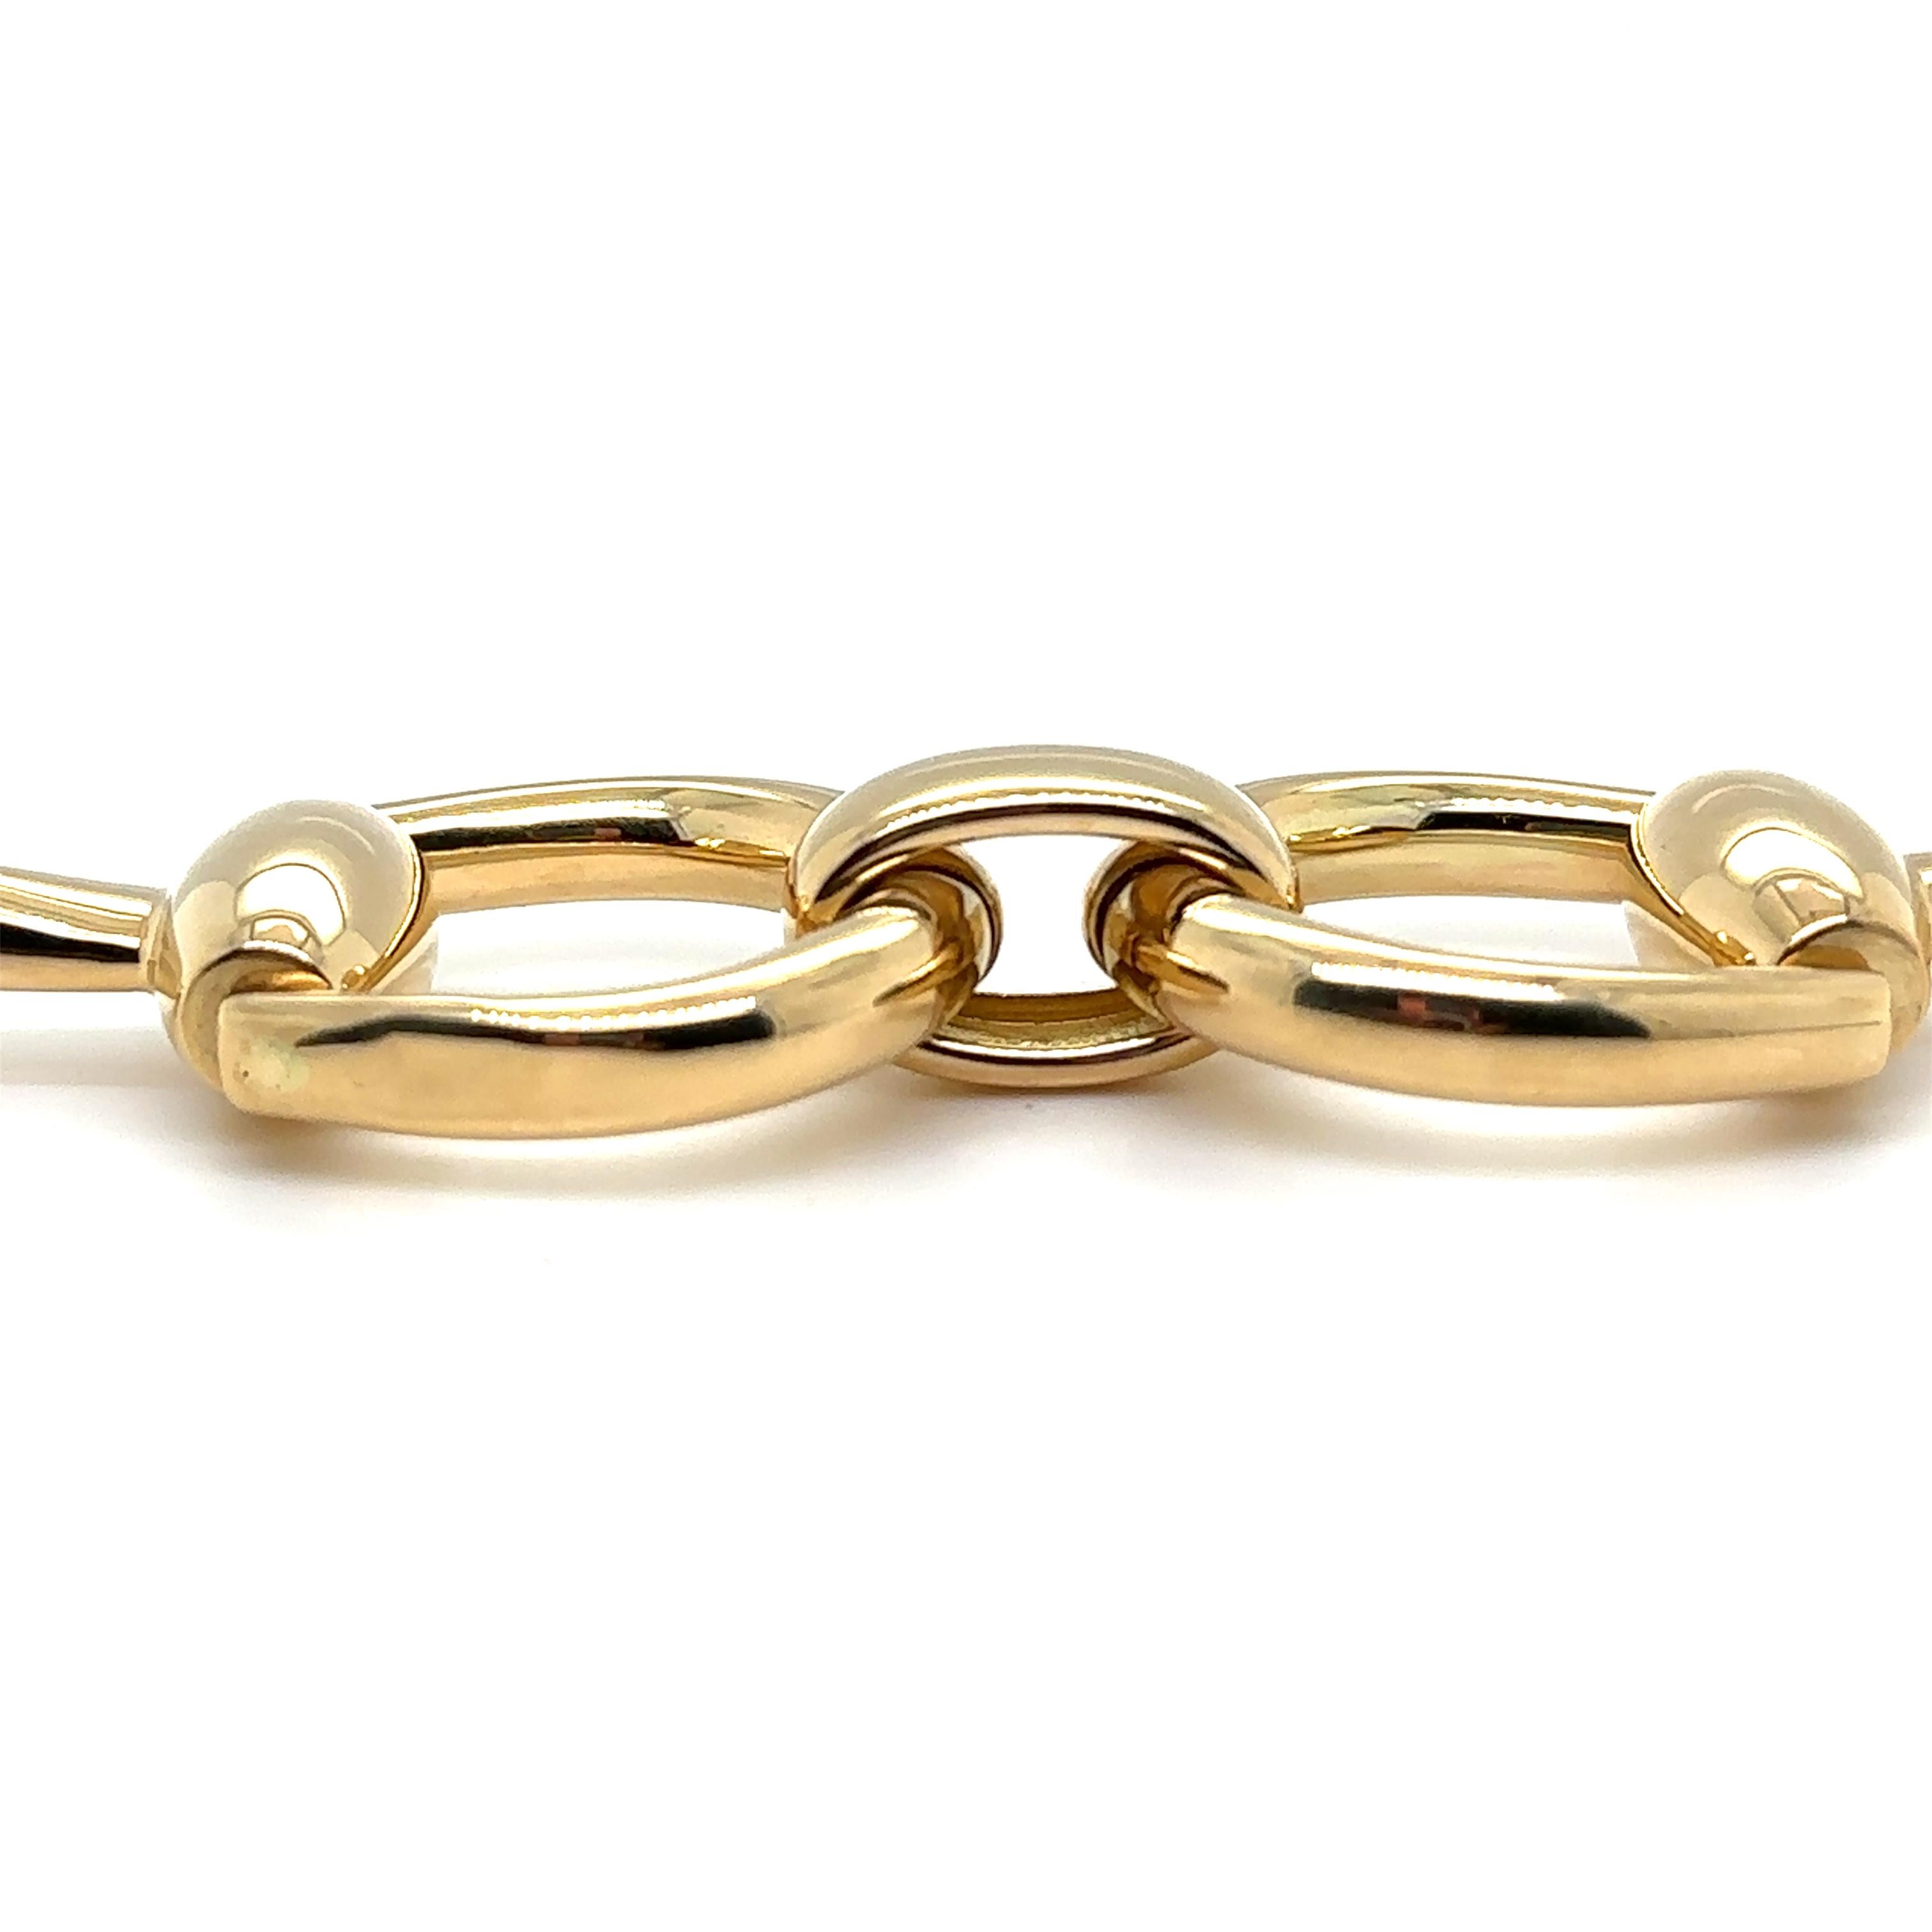 Unique features: 

A Gucci Bracelet, made of 18ct Yellow Gold, weighing 56.63 grams.

Metal: 18ct Yellow Gold
Carat: N/A
Colour: N/A
Clarity:  N/A
Cut: N/A 
Weight: 56.63 grams
Engravings/Markings: Signed 18 made in Italy

Size/Measurement: